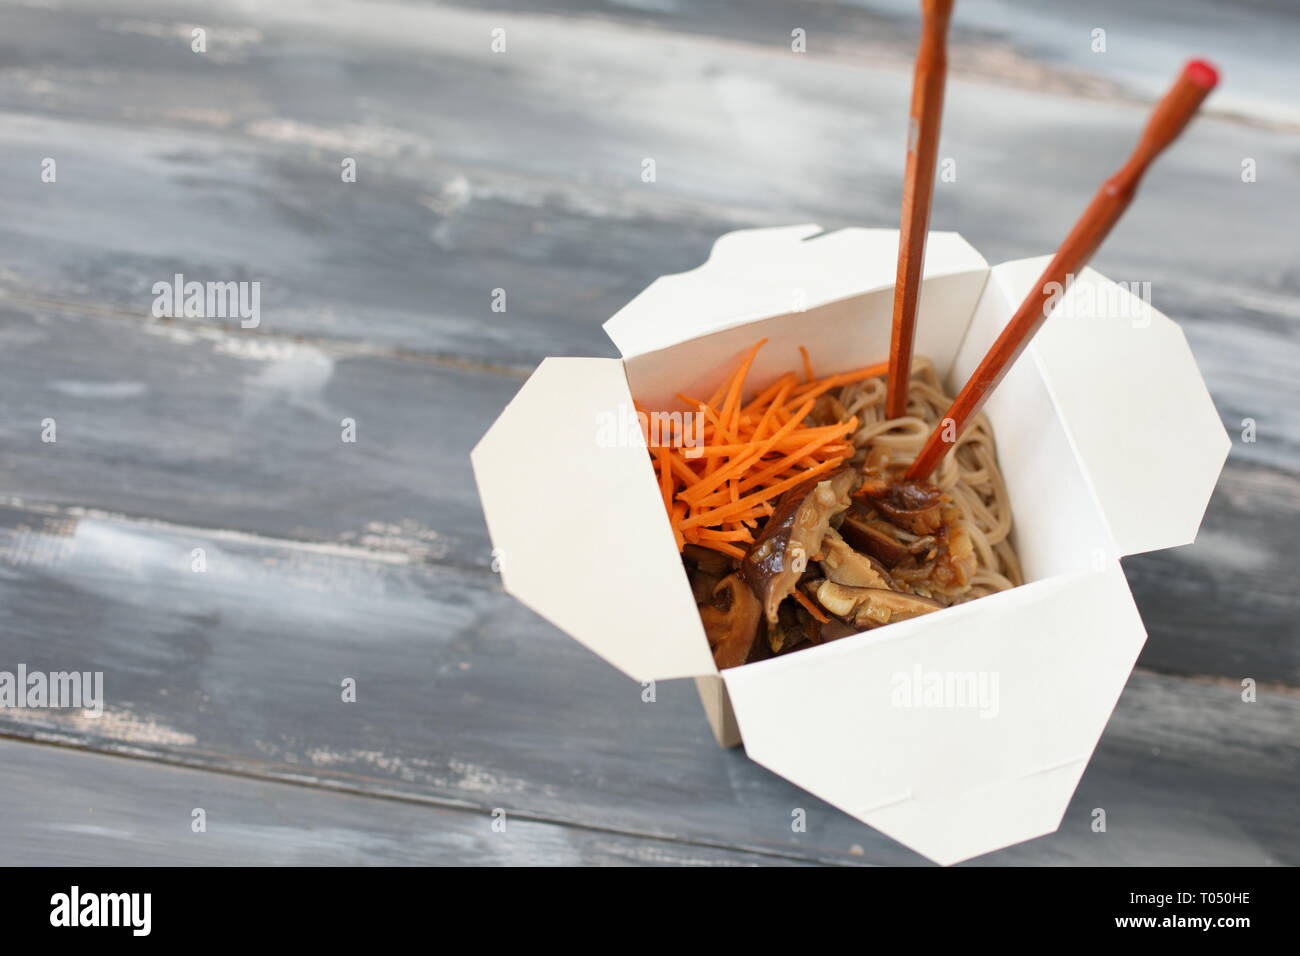 Shiitake mushrooms and soba noodles with carrot in a disposable wok box Stock Photo